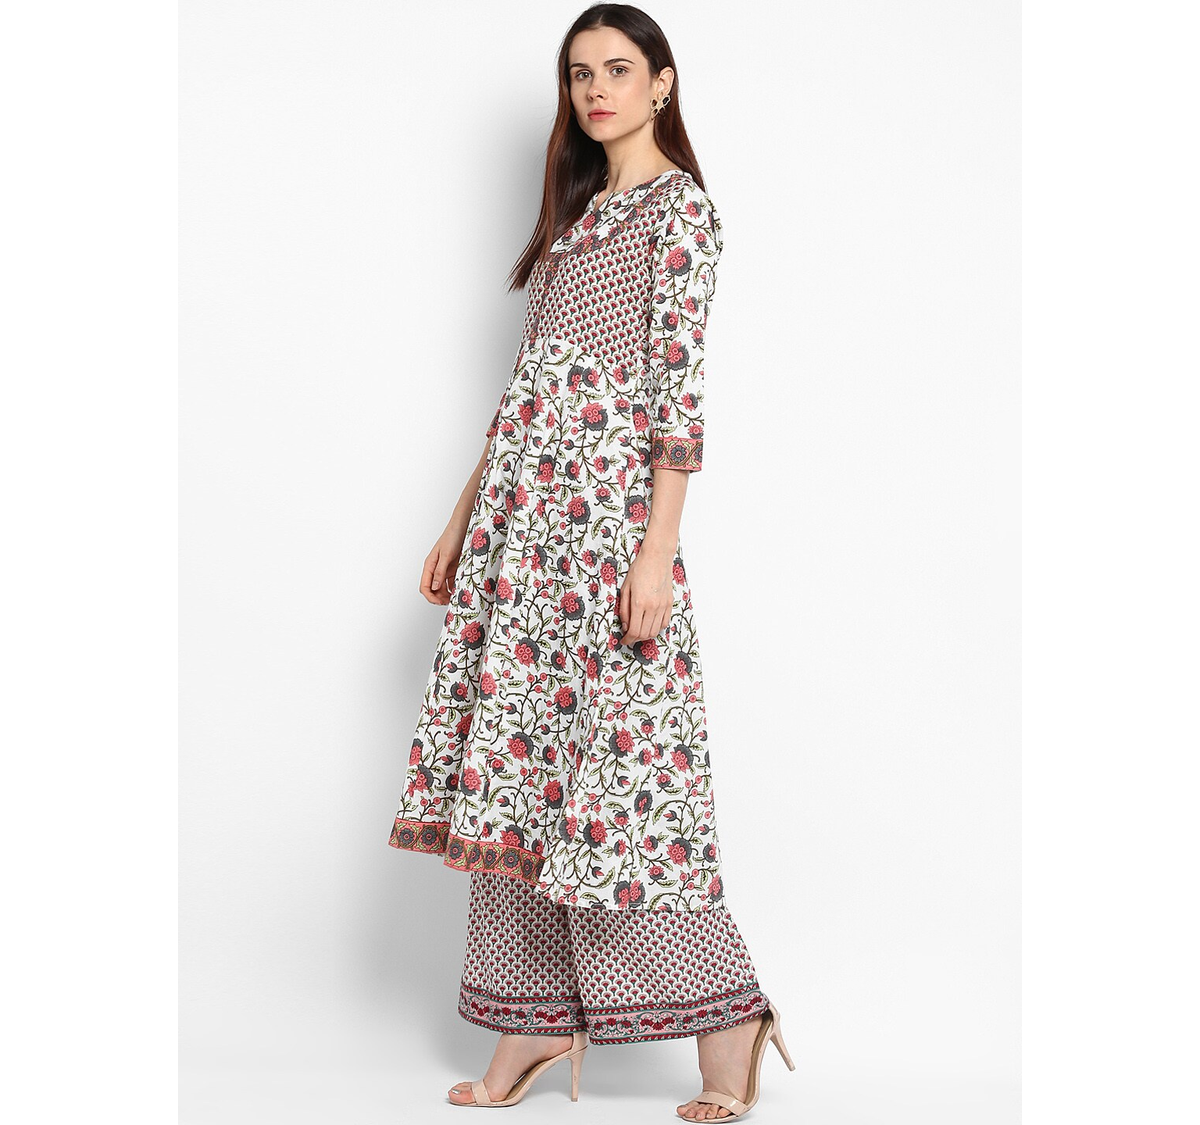 Women's  Off-White & Red Printed Kurta With Palazzos - Wahe-NOOR